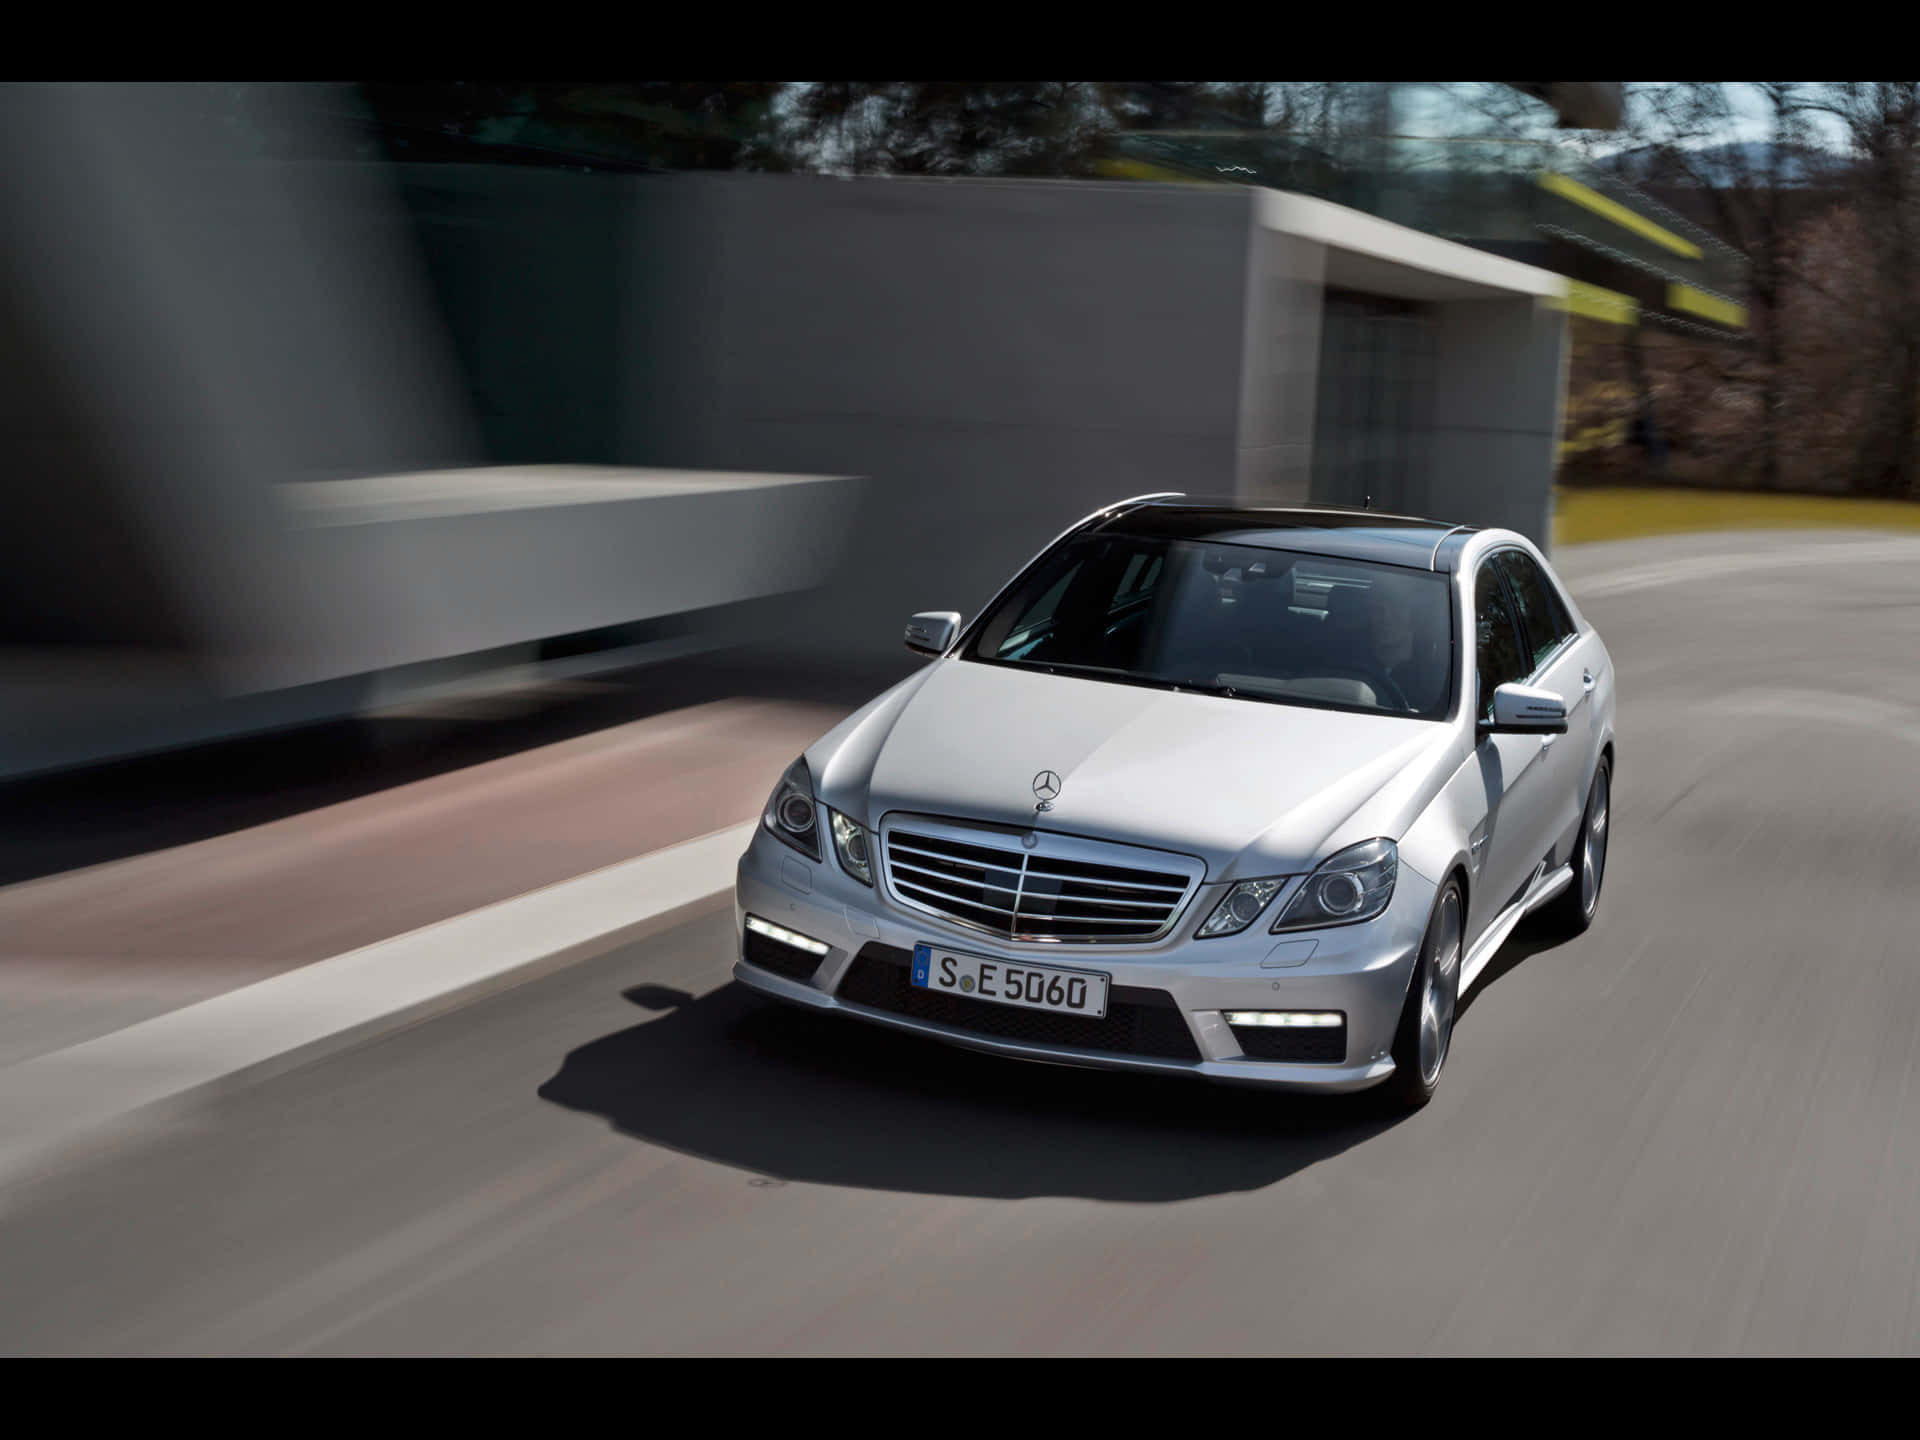 Mercedes Benz E550 W212 Review and Overview